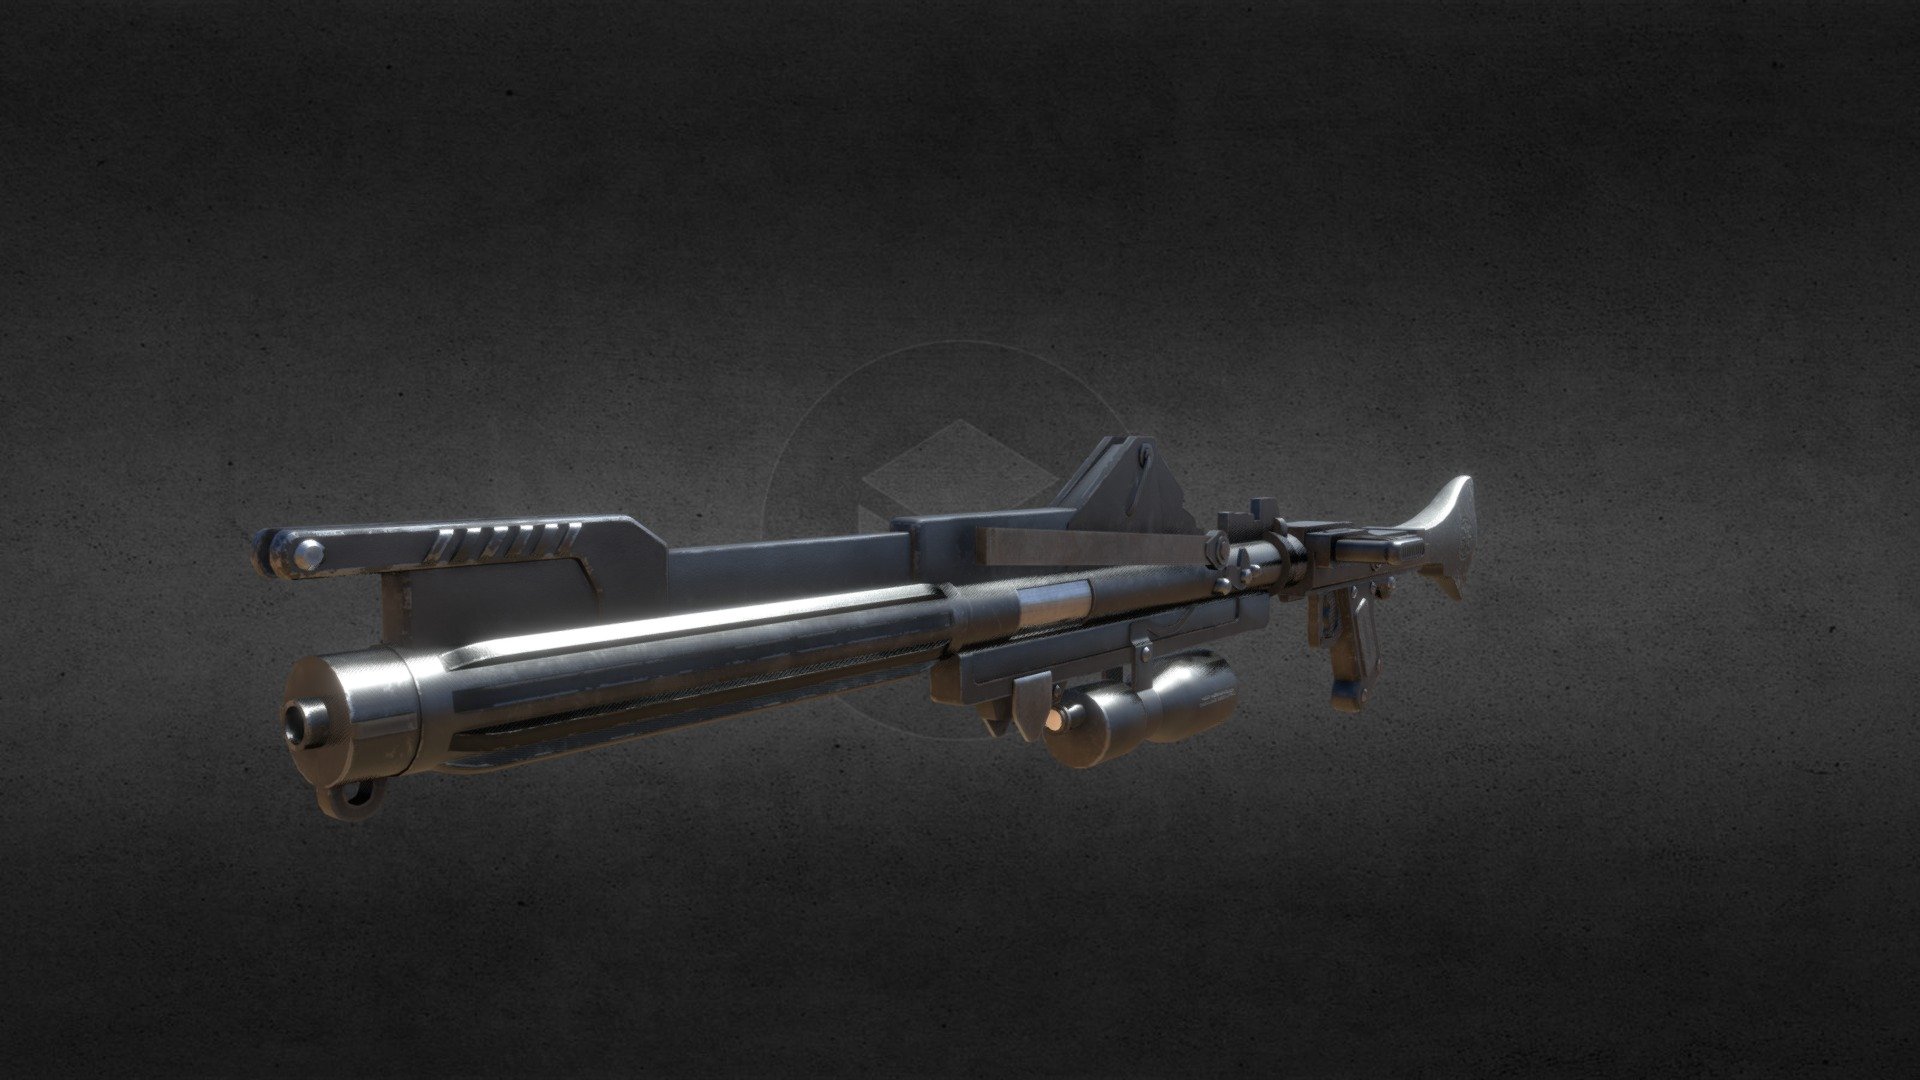 The standard issue blaster used by Clone Troopers during the Clone Wars. Praised for its accuracy and ease of use, this weapon demolished more droids than any other weapon. Loosely based on the MG34 used by german machine gun squads during World War II, the buttstock and receiver are the only parts that resemble this real life weapon of war 3d model